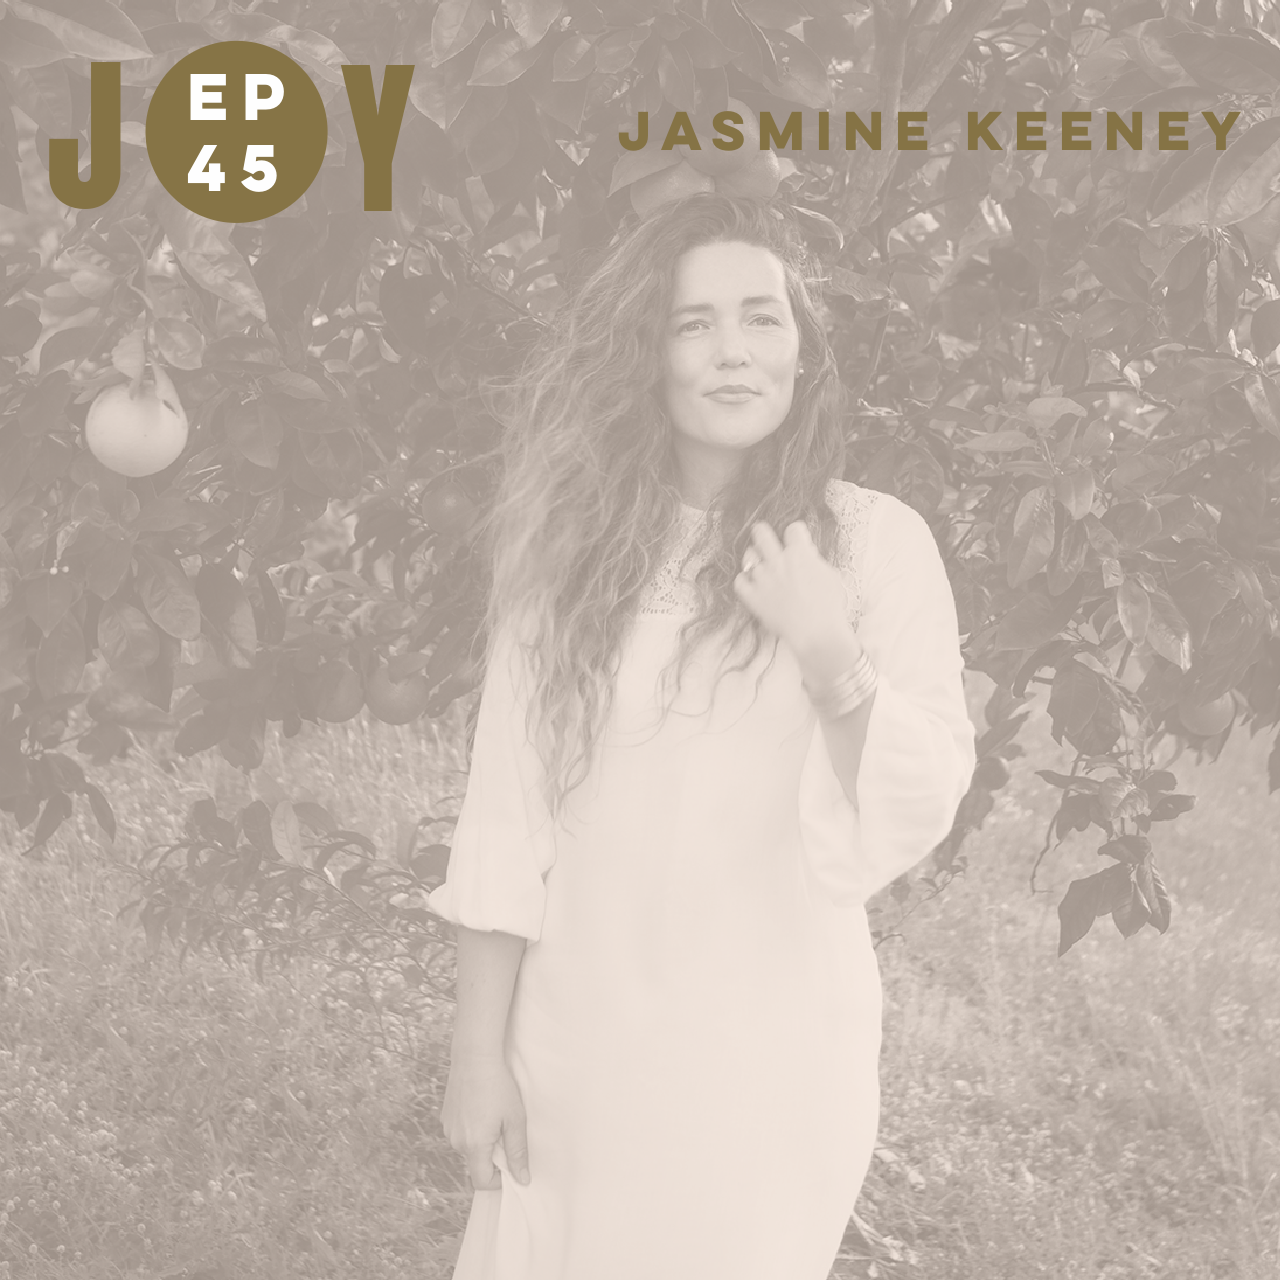 JOY IS NOW: THESE THREE THINGS WITH JASMINE KEENEY